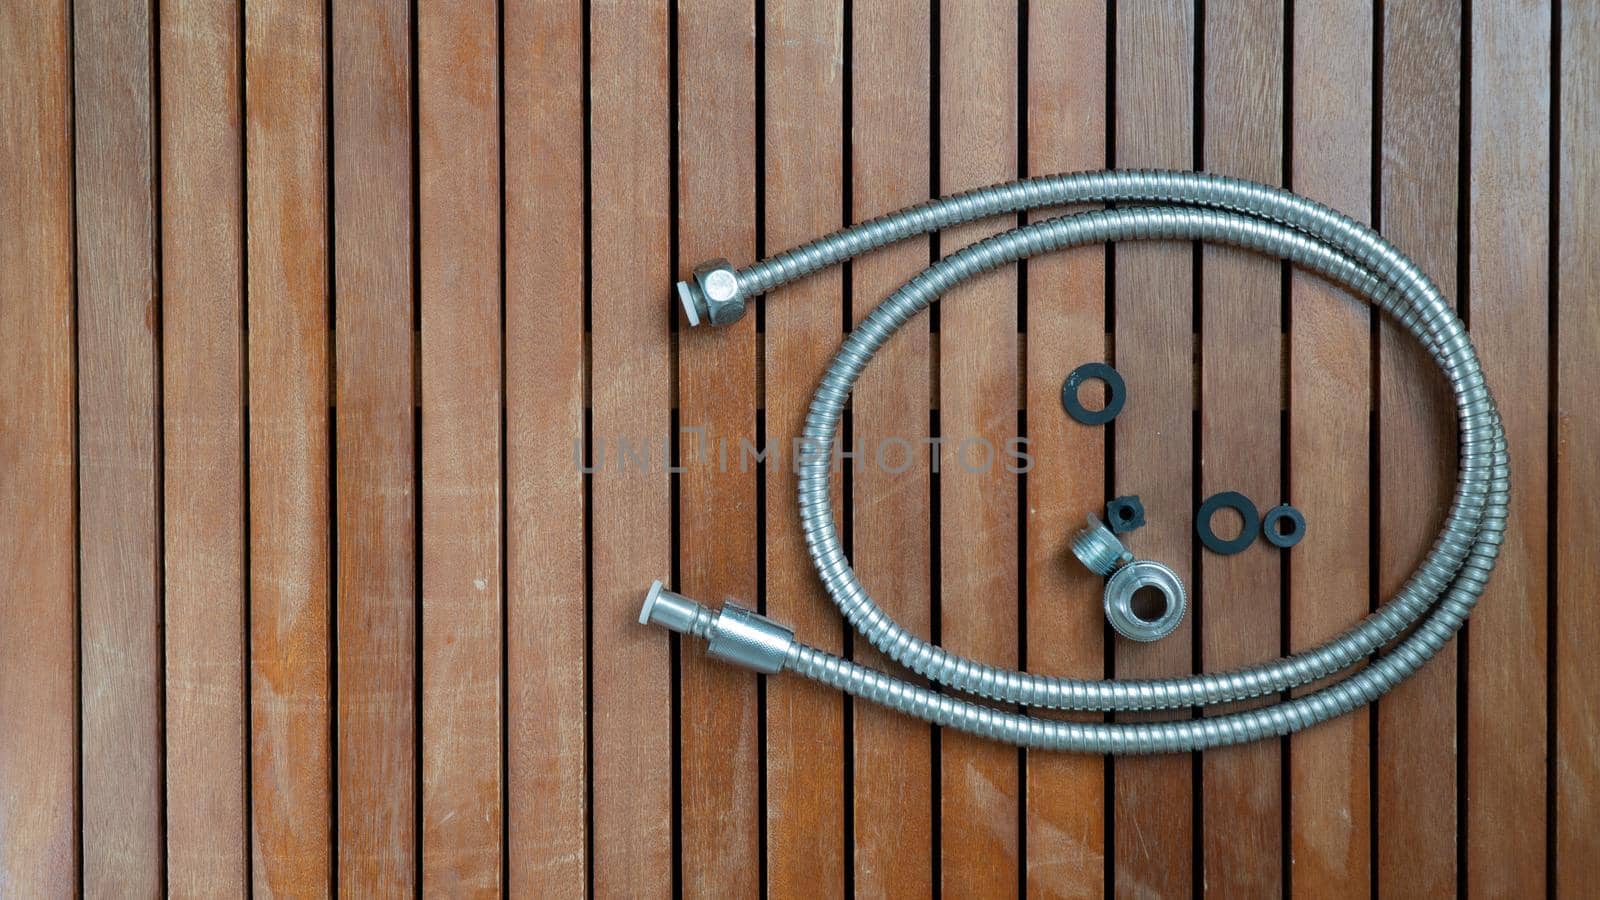 Hose and spare parts on wooden table background with space for text. High quality photo